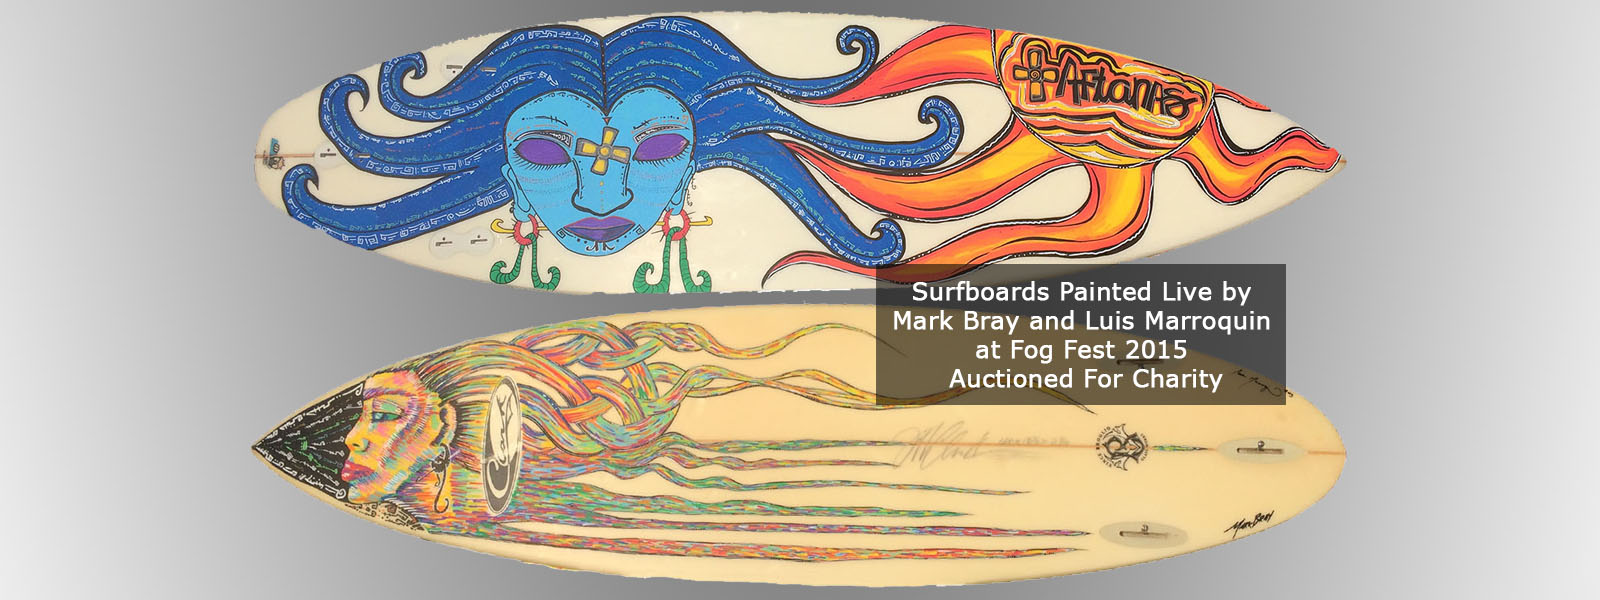 Surfboards Painted Live by Mark Bray and Luis Marroquin at Fog Fest 2015 Auctioned For Charity